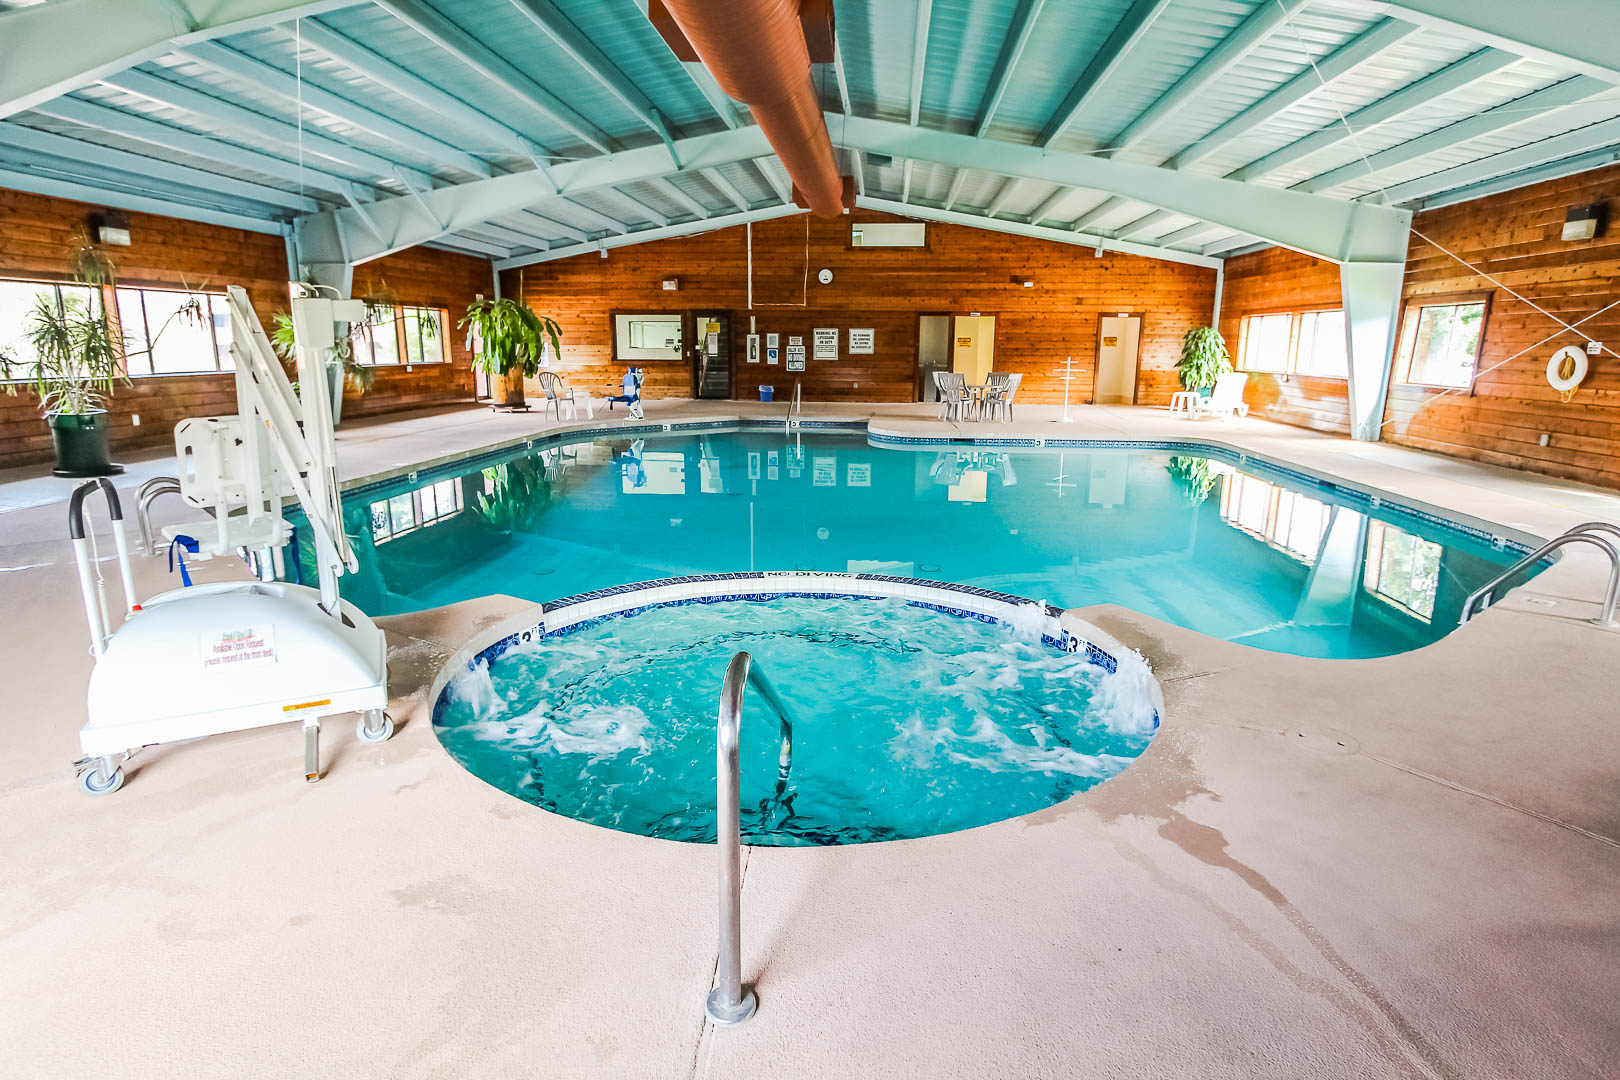 A spacious indoor swimming pool and Jacuzzi at VRI's Roundhouse Resort in Pinetop, Arizona.